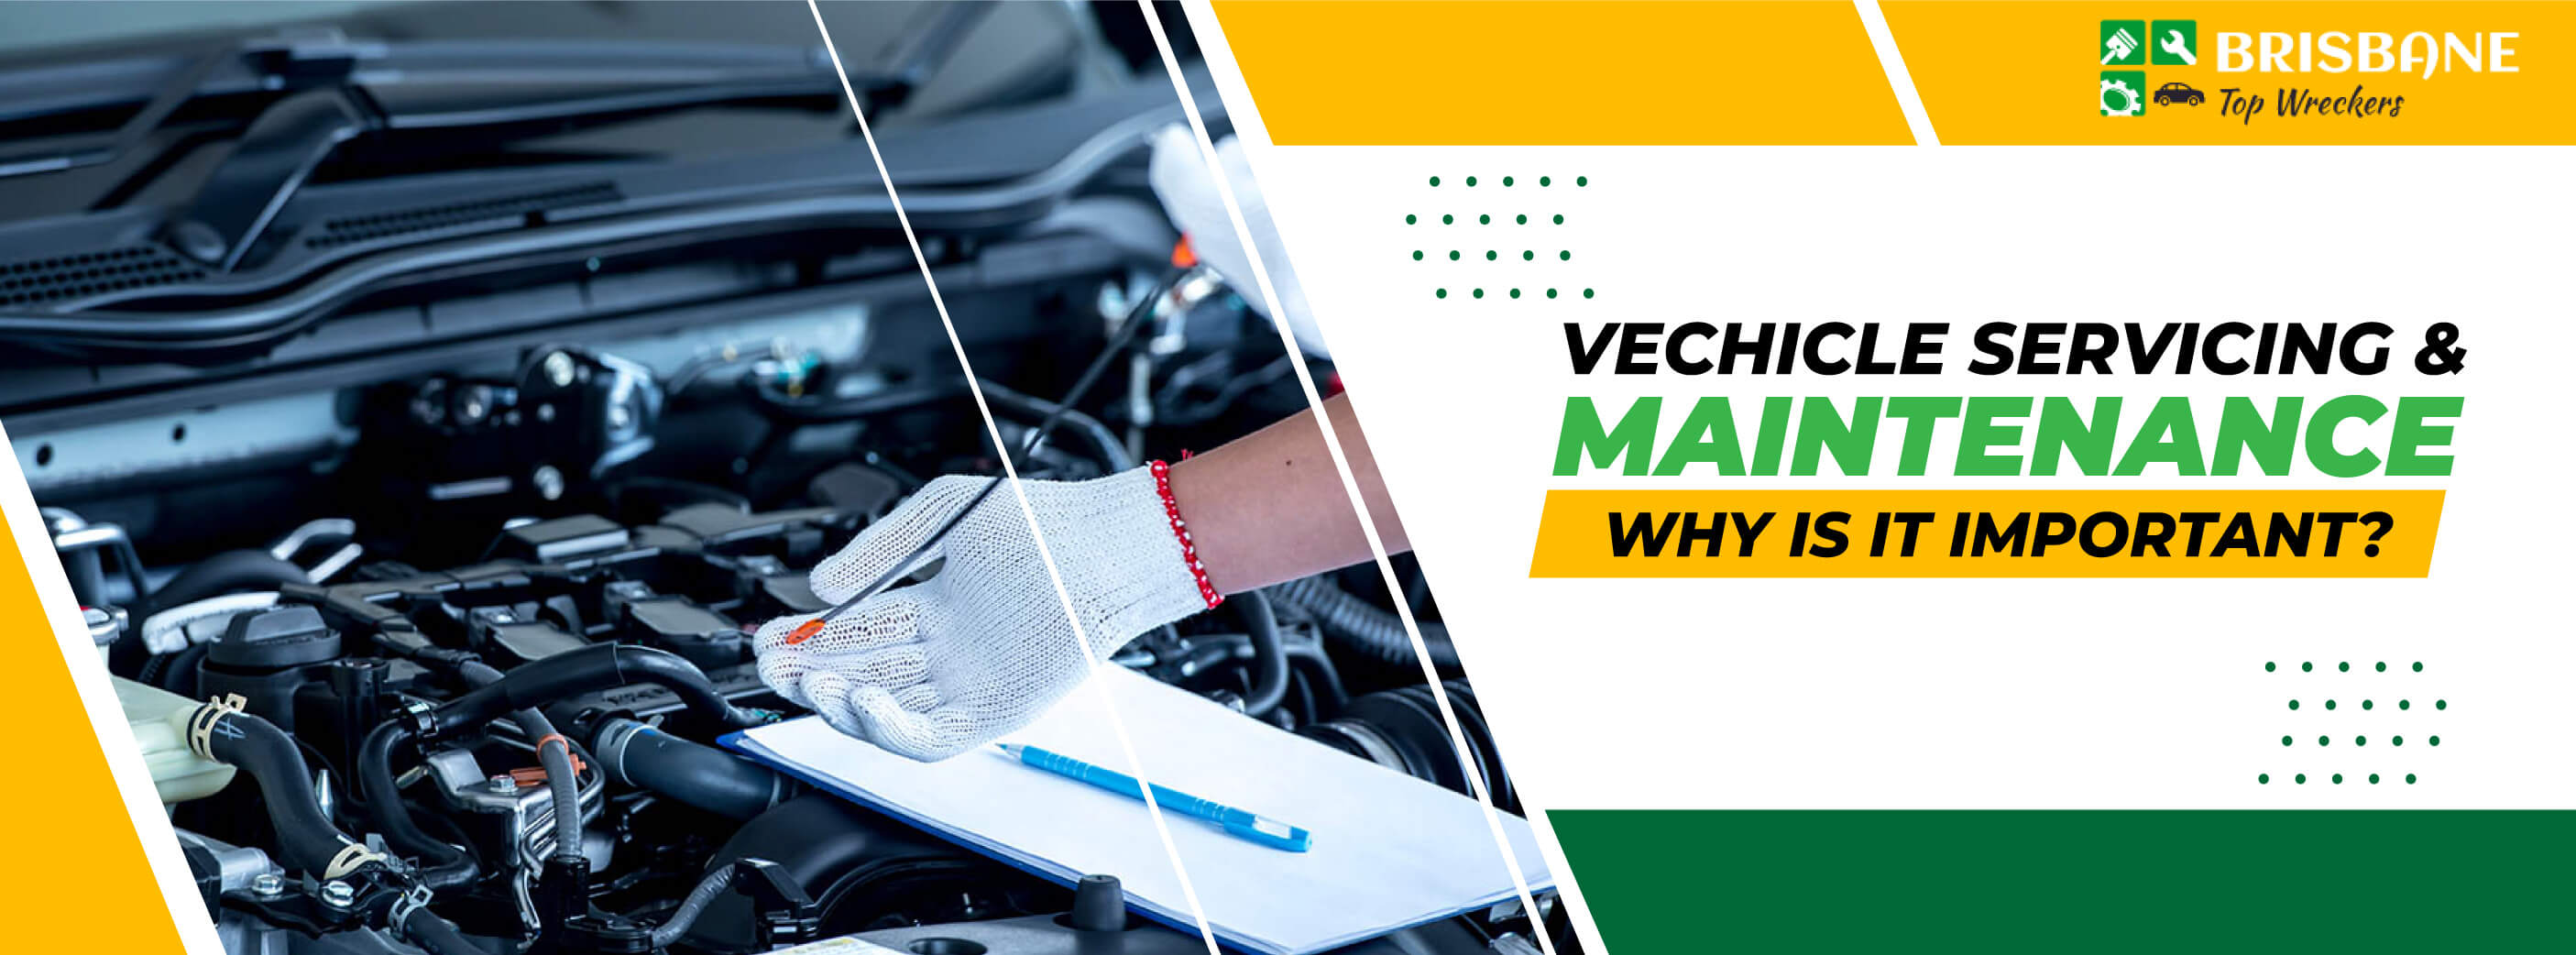 Vehicle Servicing And Maintenance Why Is It Important